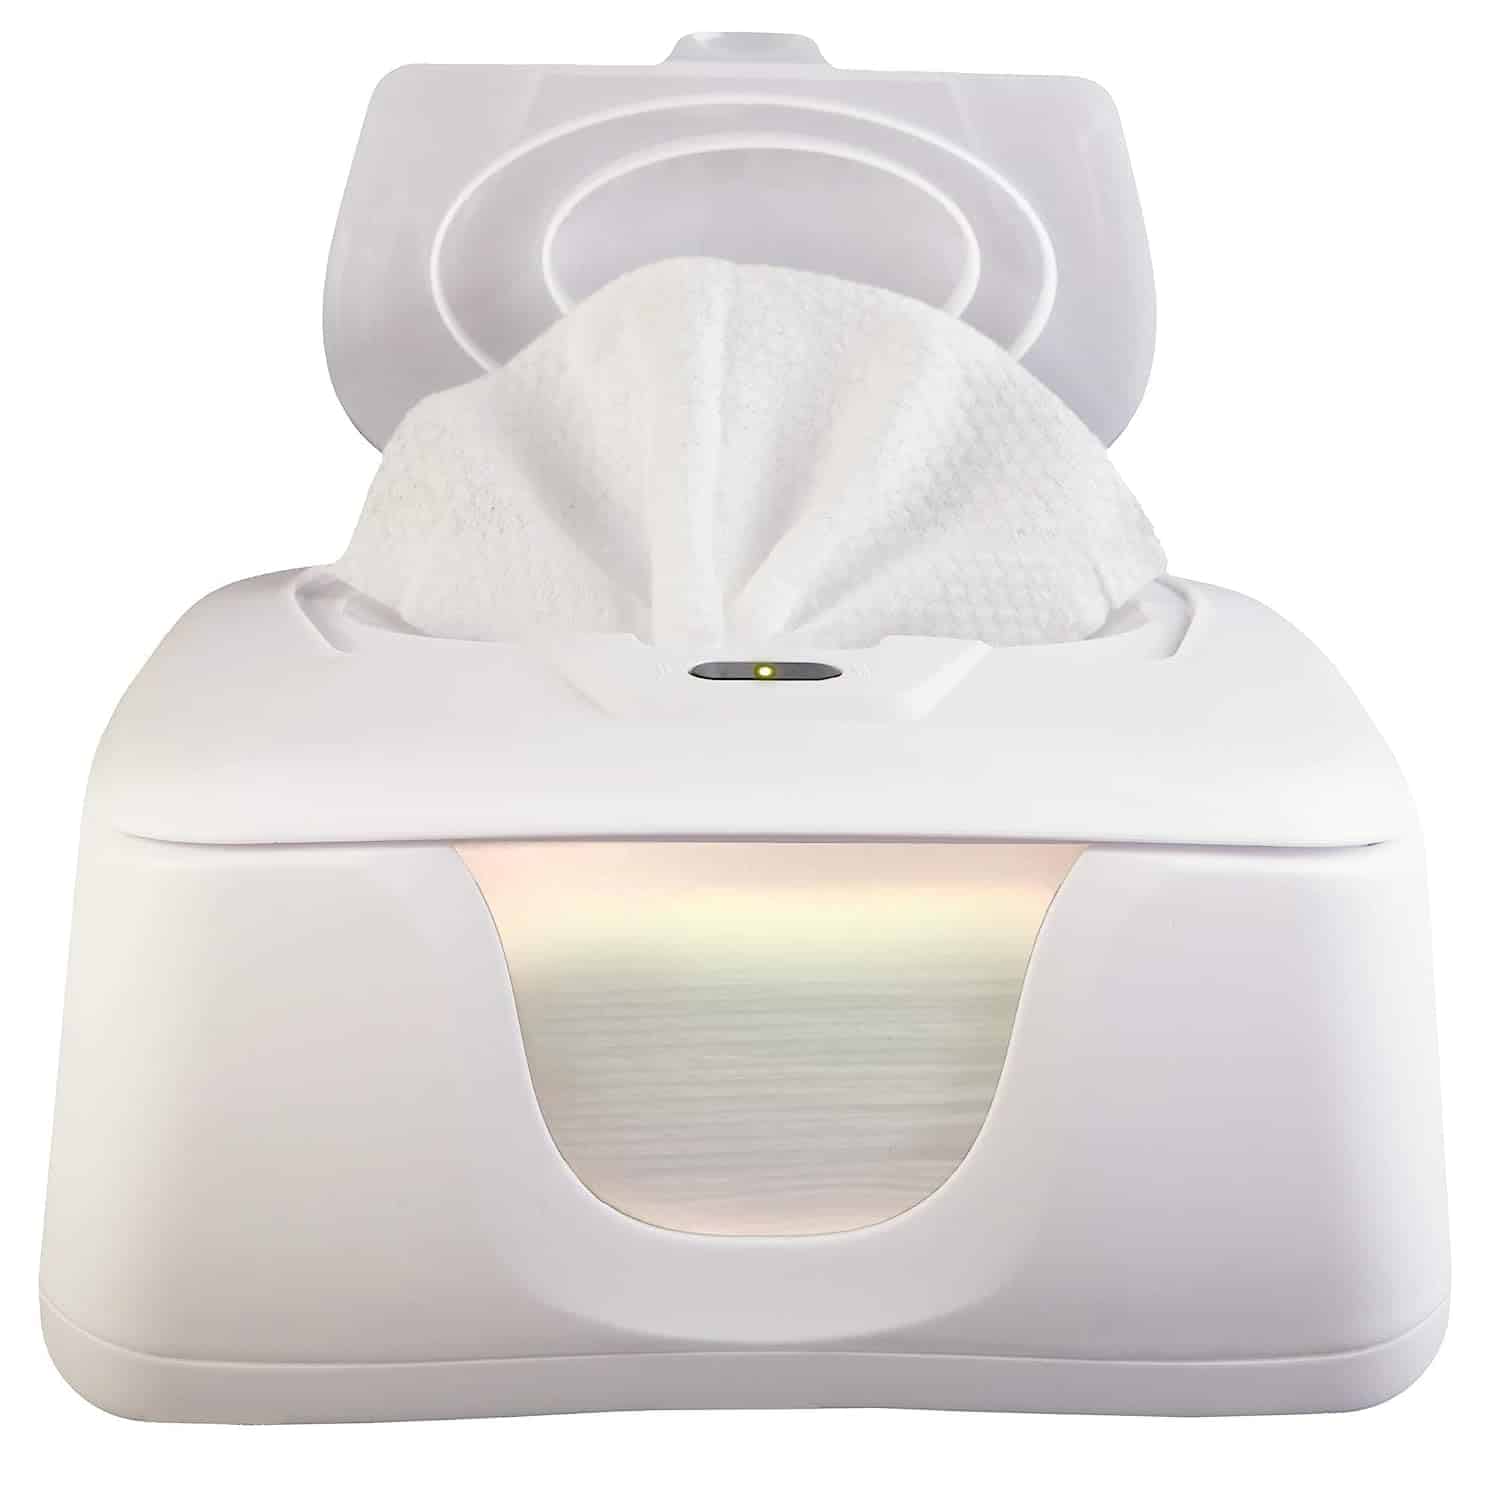 Go-Go Pure Baby Wipes Warmer and Dispenser